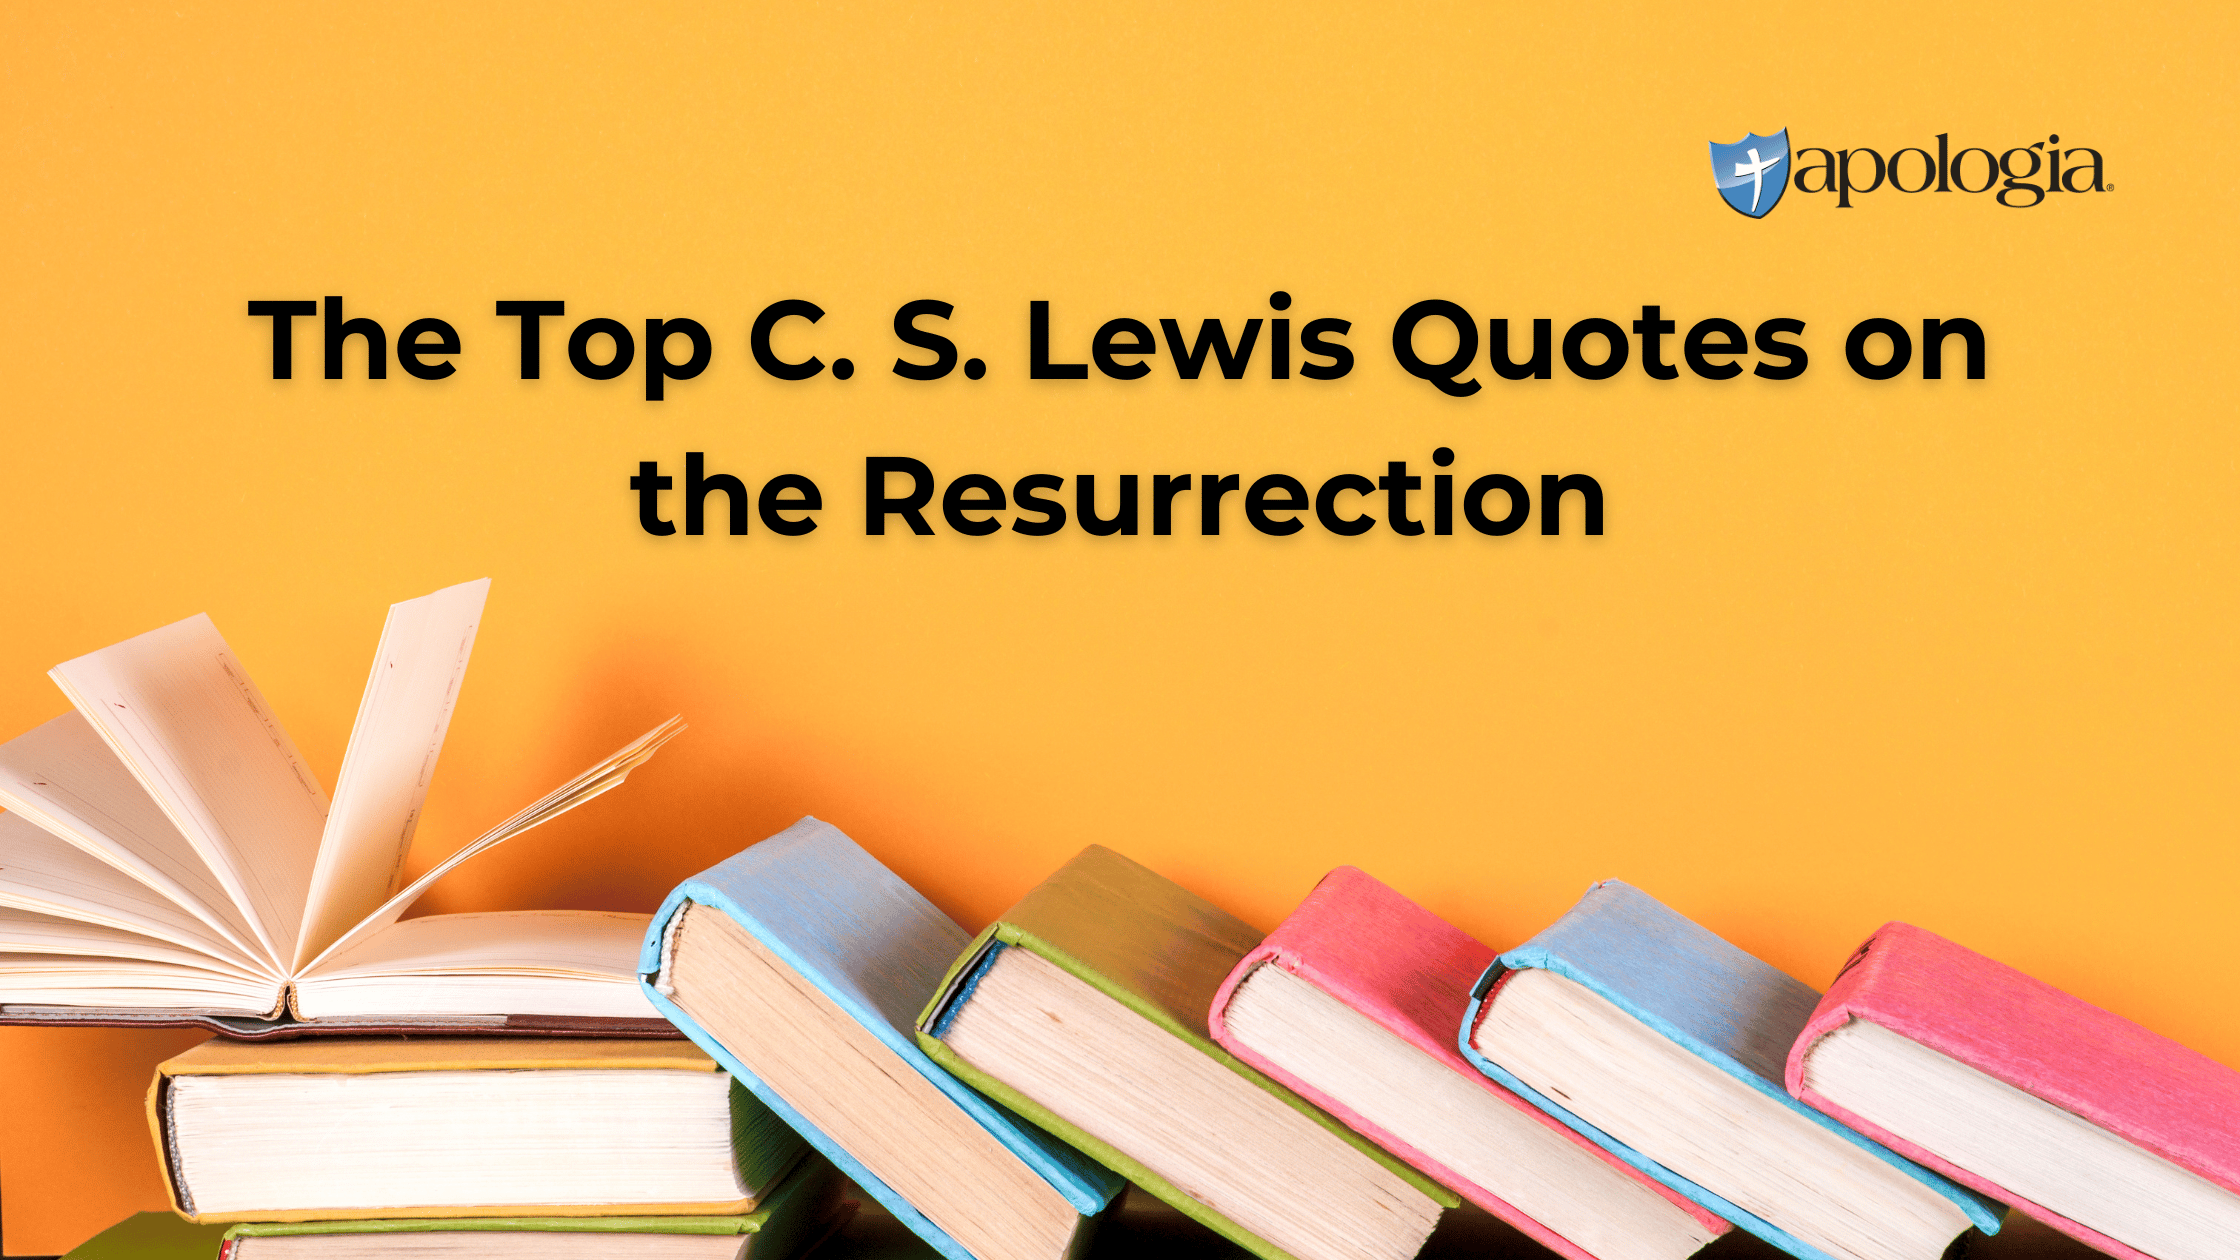 The Top C. S. Lewis Quotes on the Resurrection